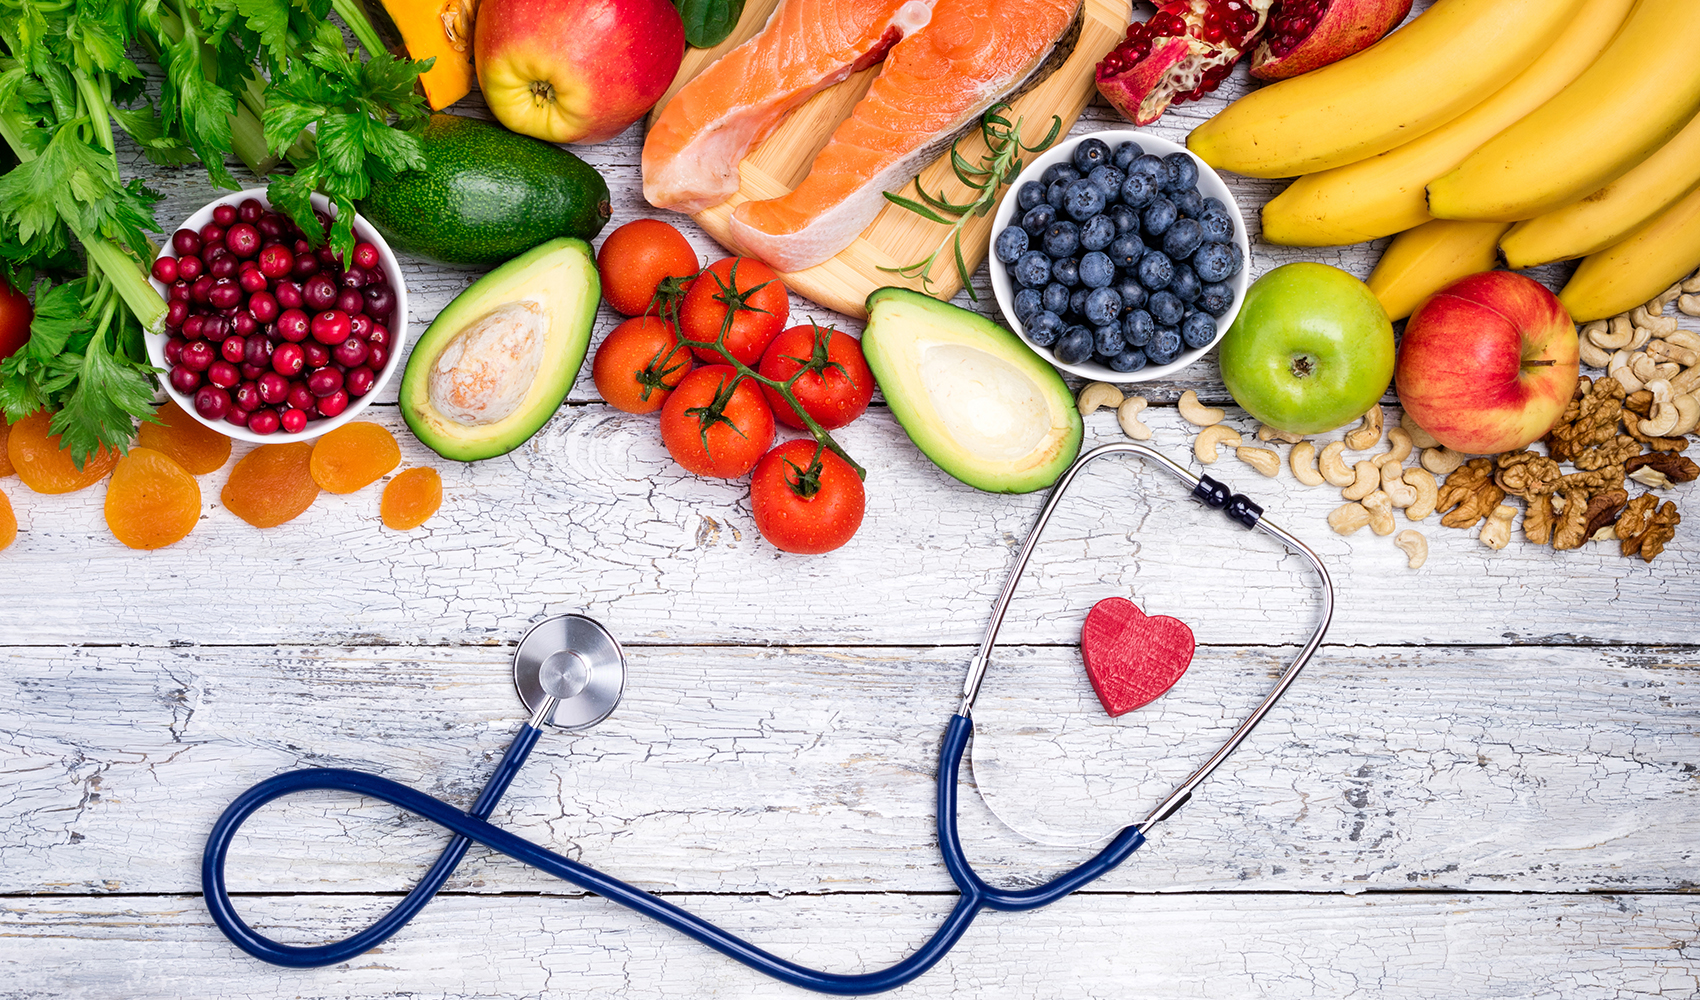 What is the Relationship Between Nutrition and Health?